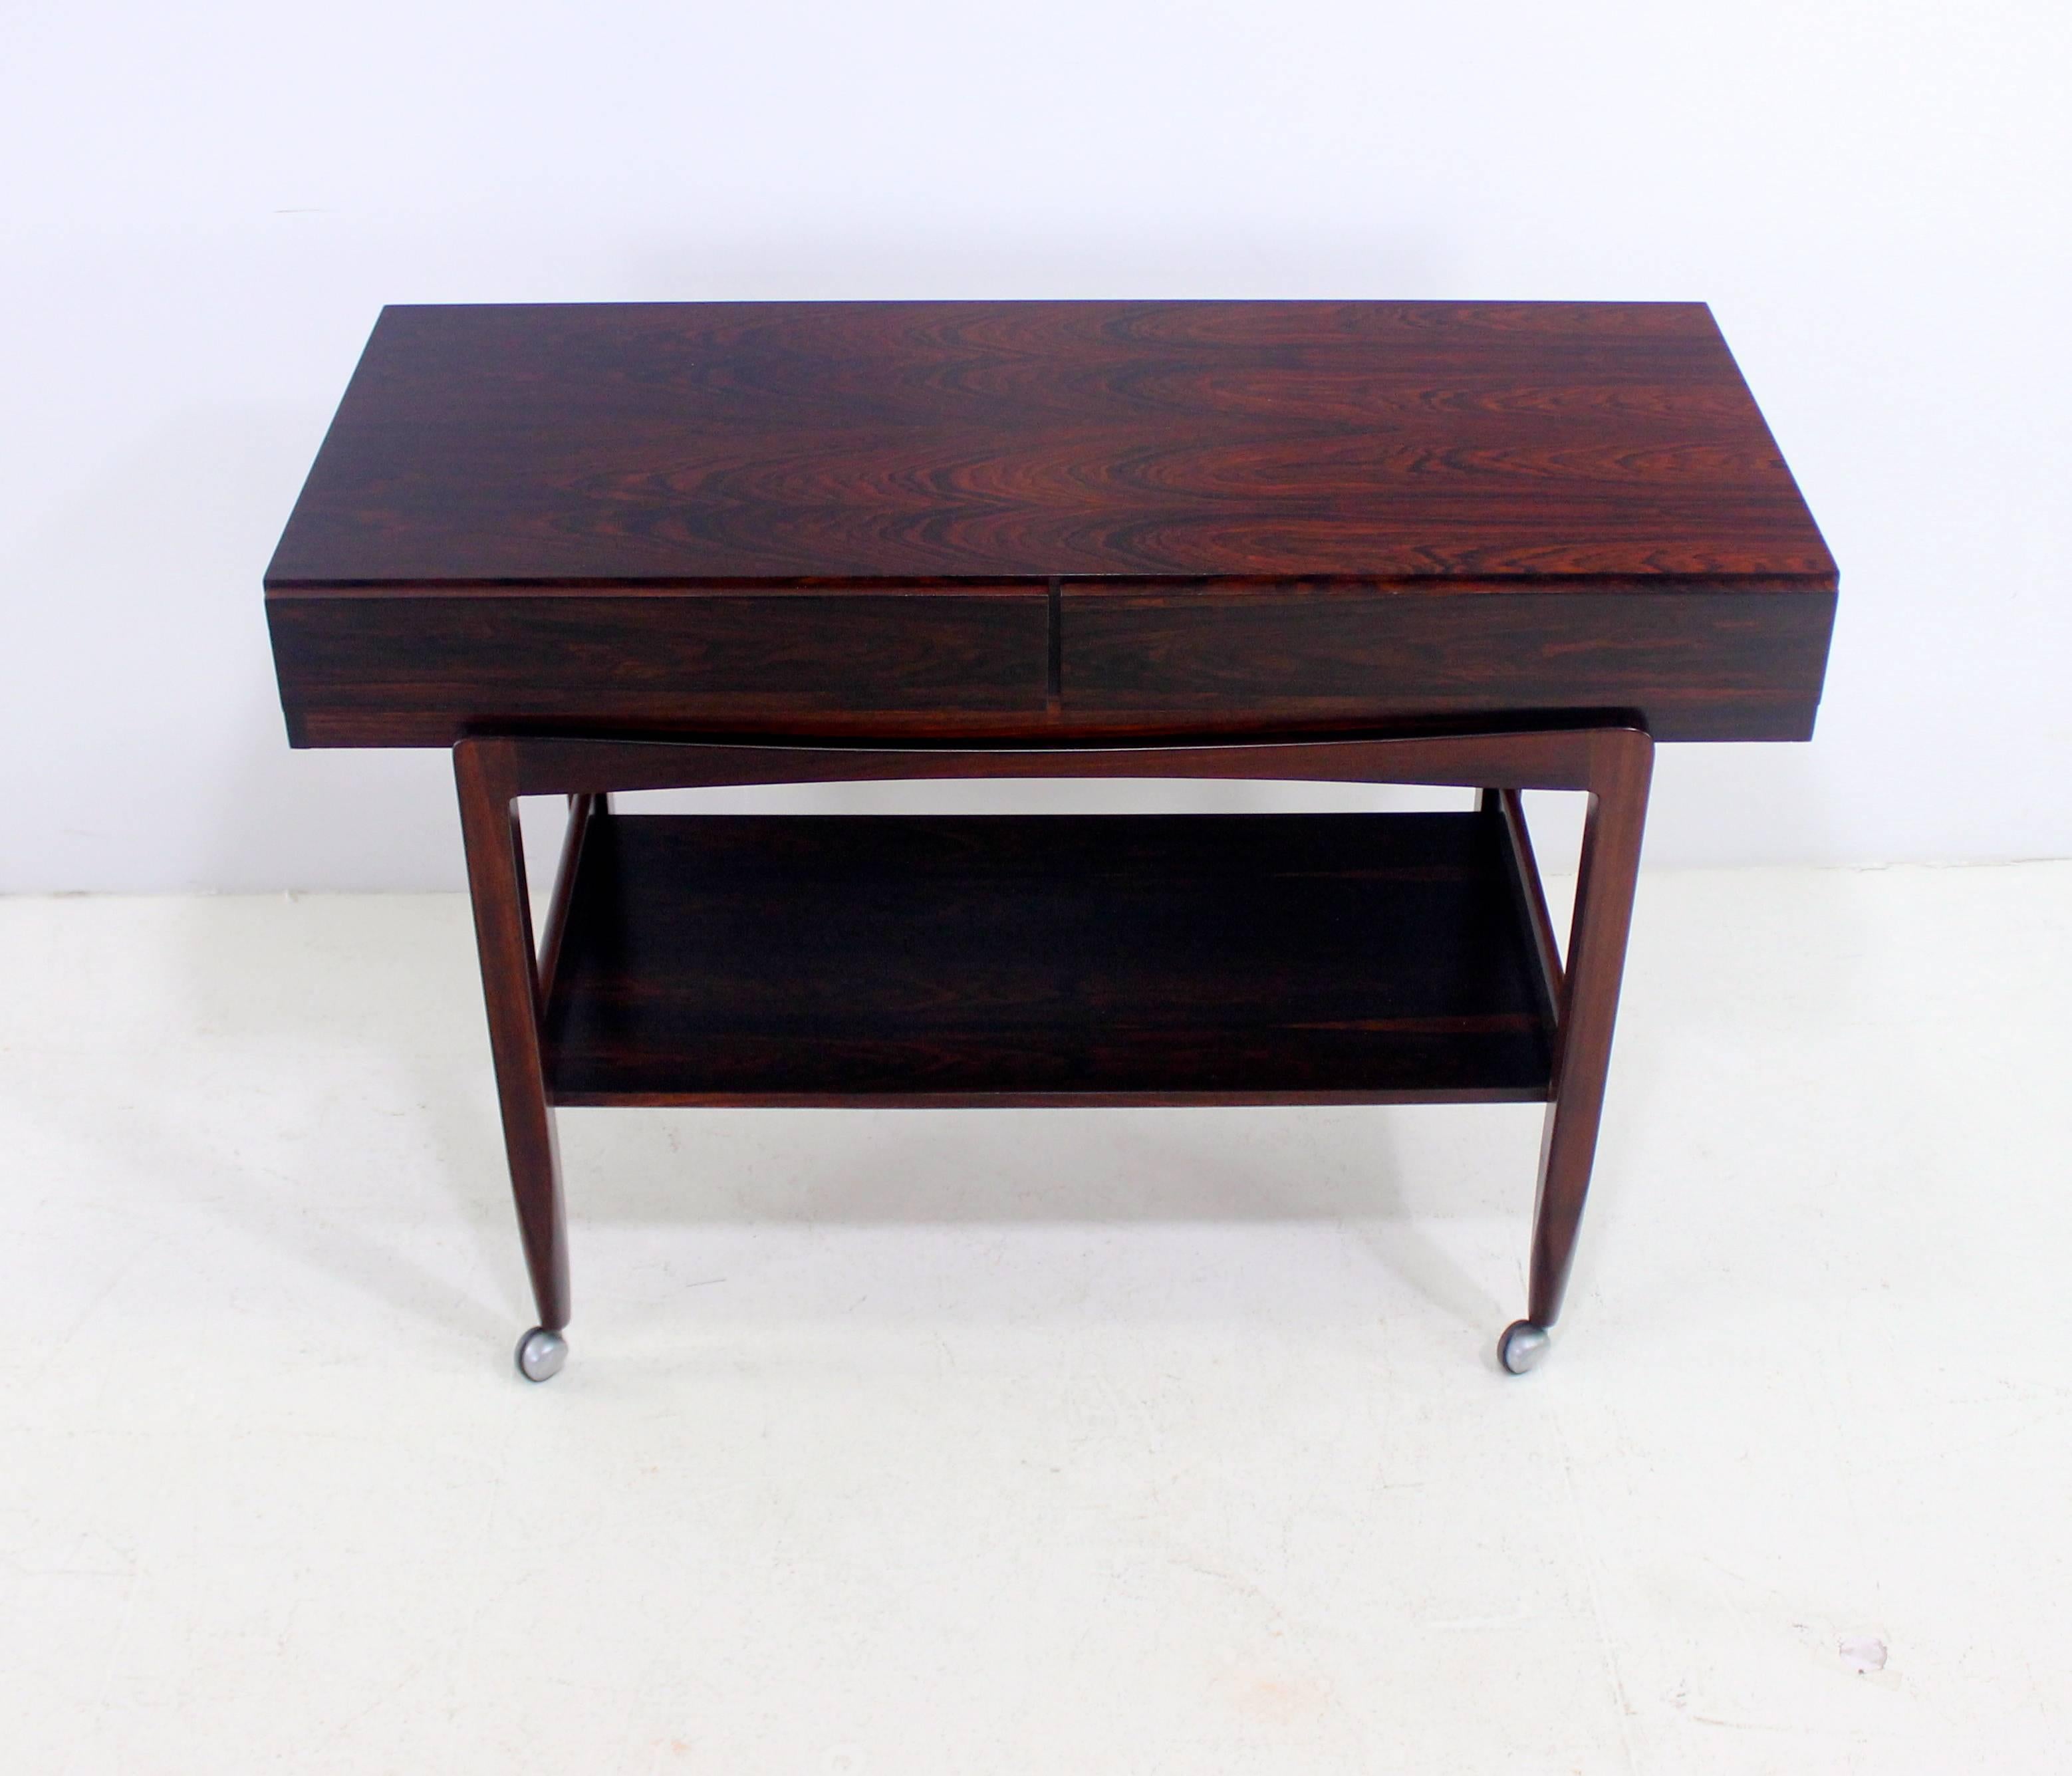 Rare Danish Modern Rosewood Console or Server Designed by Ib Kofod Larsen For Sale 1